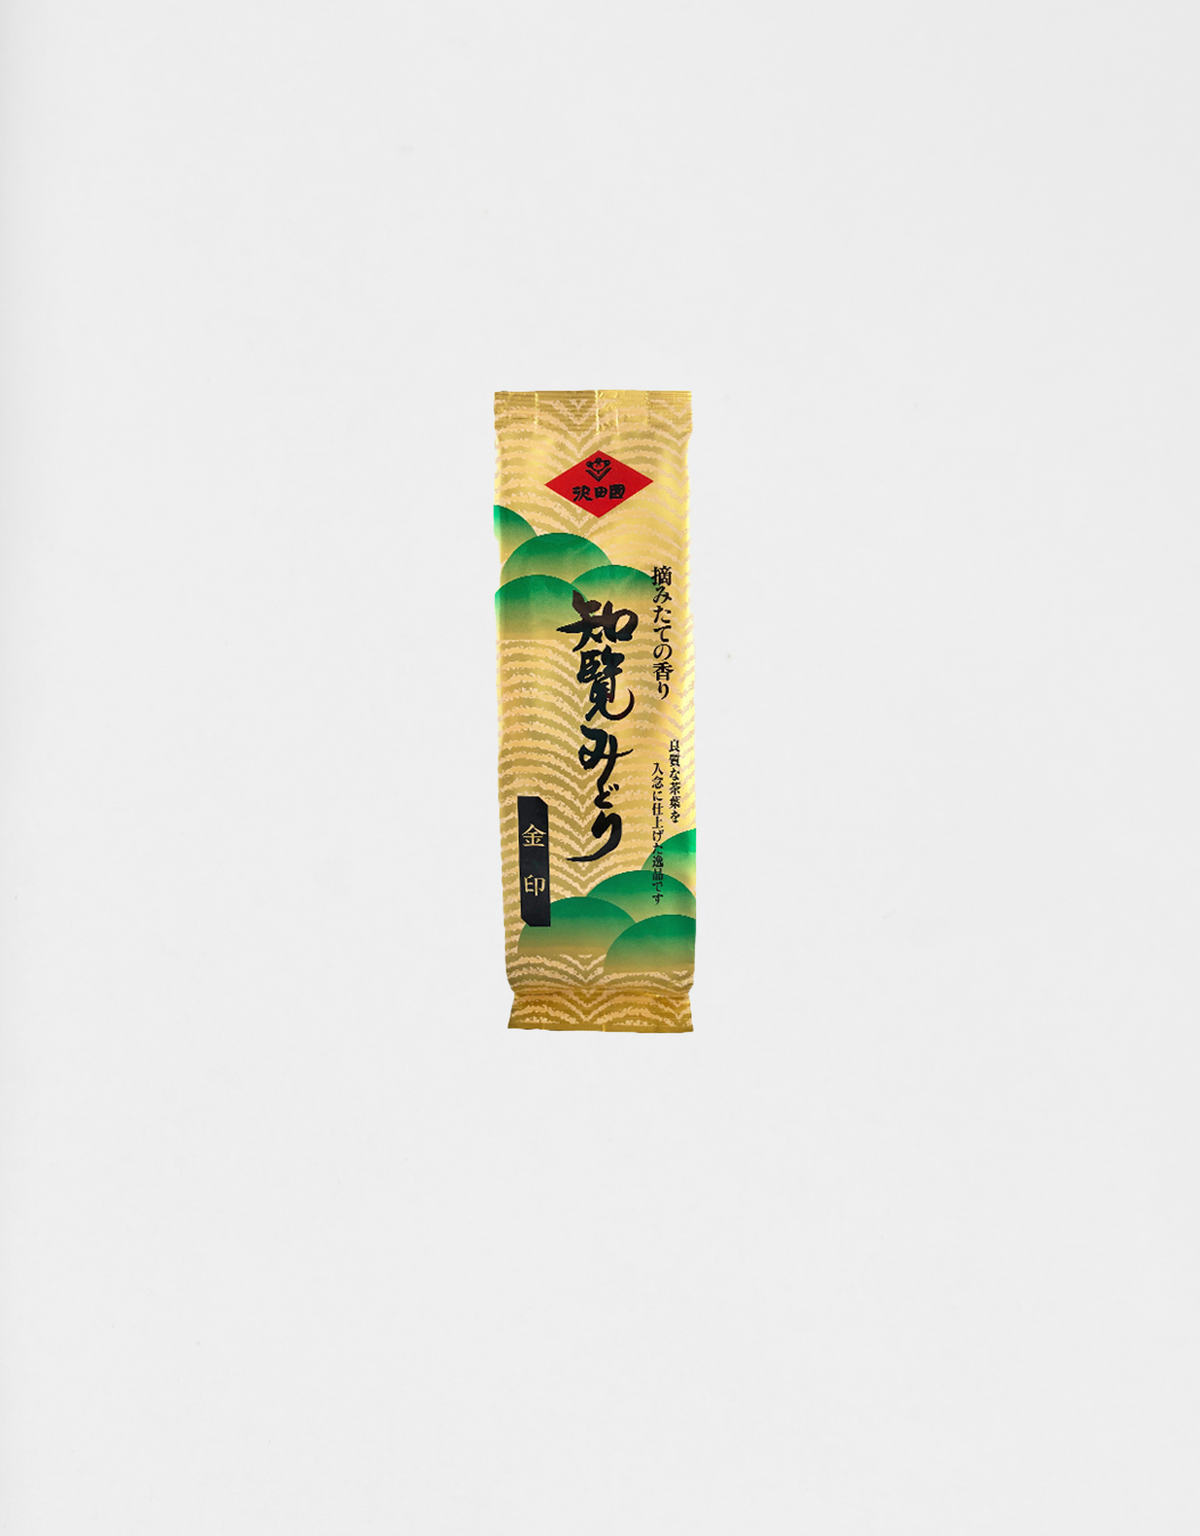 "The long-awaited gold seal! Here it is! ] Chiran Midori Gold Seal (100g)